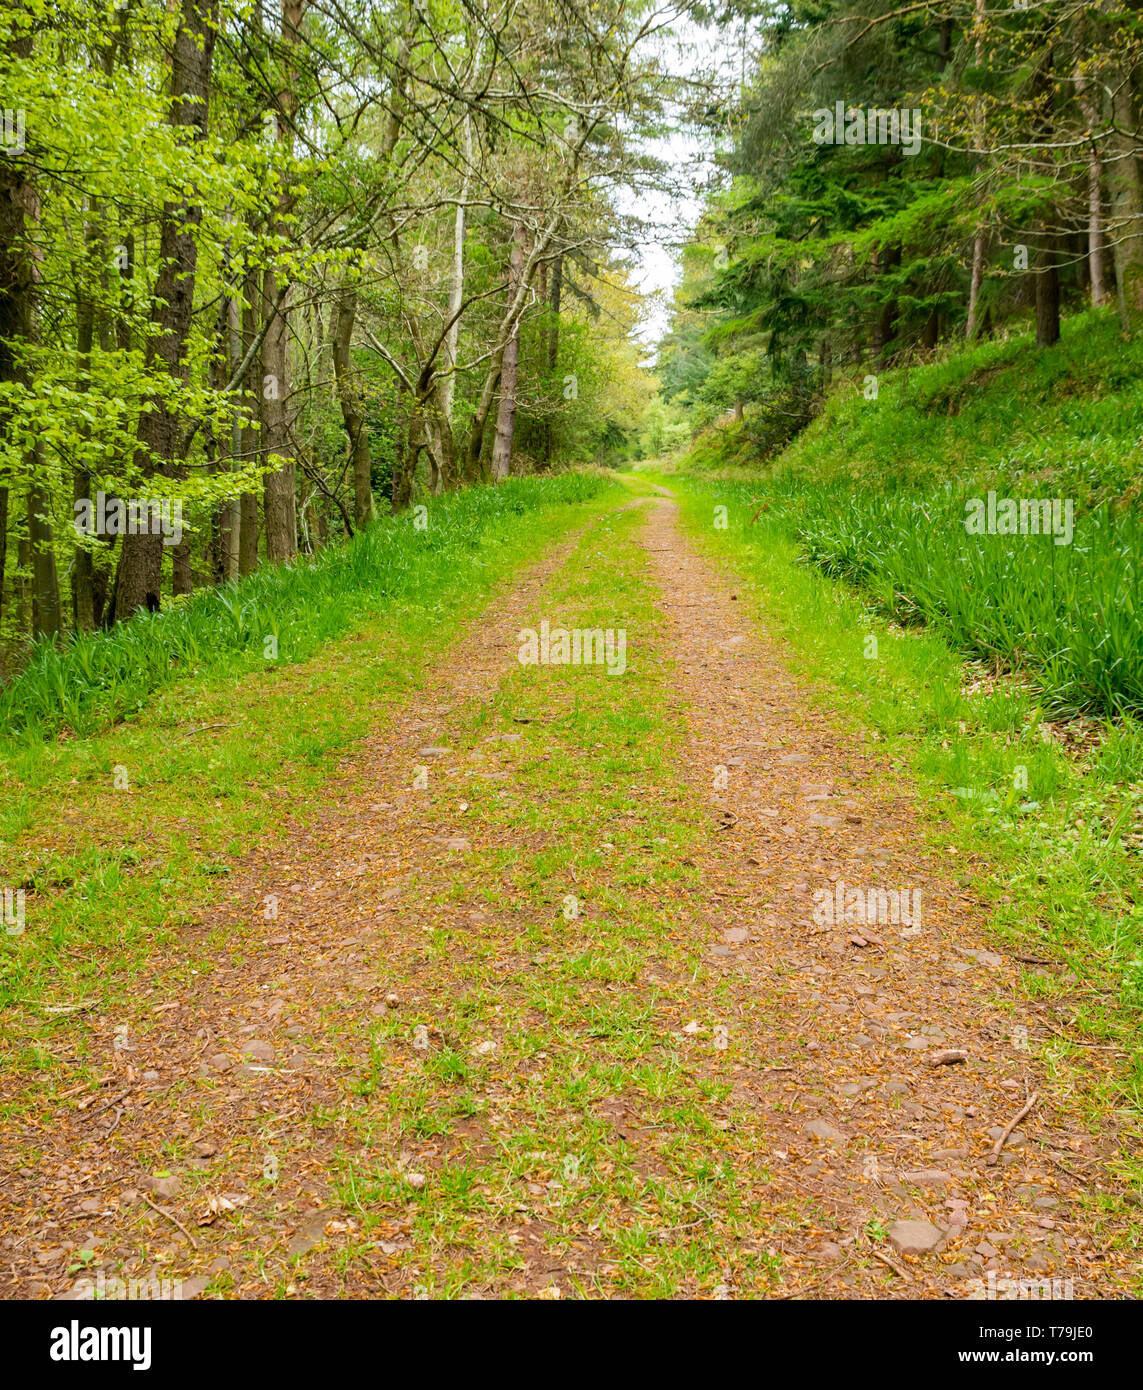 Track leading into distance through woodland forest with beech and fir trees, Pressmennan Wood, East Lothian, Scotland, UK Stock Photo